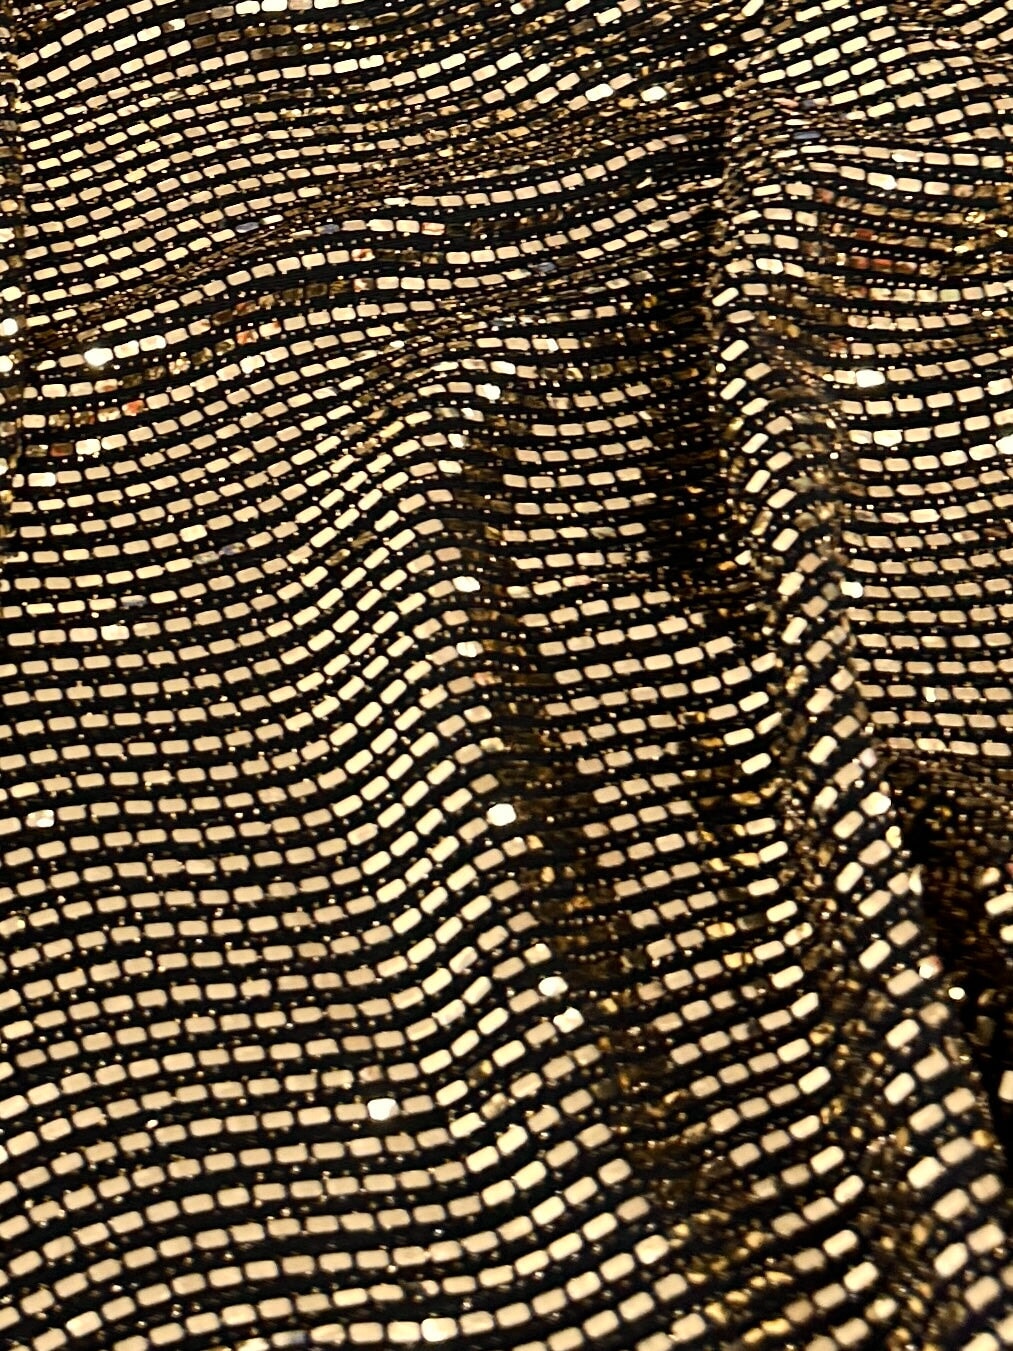 Gold Glimmery Flat Sequin Knit, Gold Disco Fabric, Stretch Metallic Spandex Sequin Fabric, sequin knit for woman, sequin knit for bride, sequin knit for party wear, sequin knit on discount, sequin knit on sale, premium sequin knit, buy sequin knit online